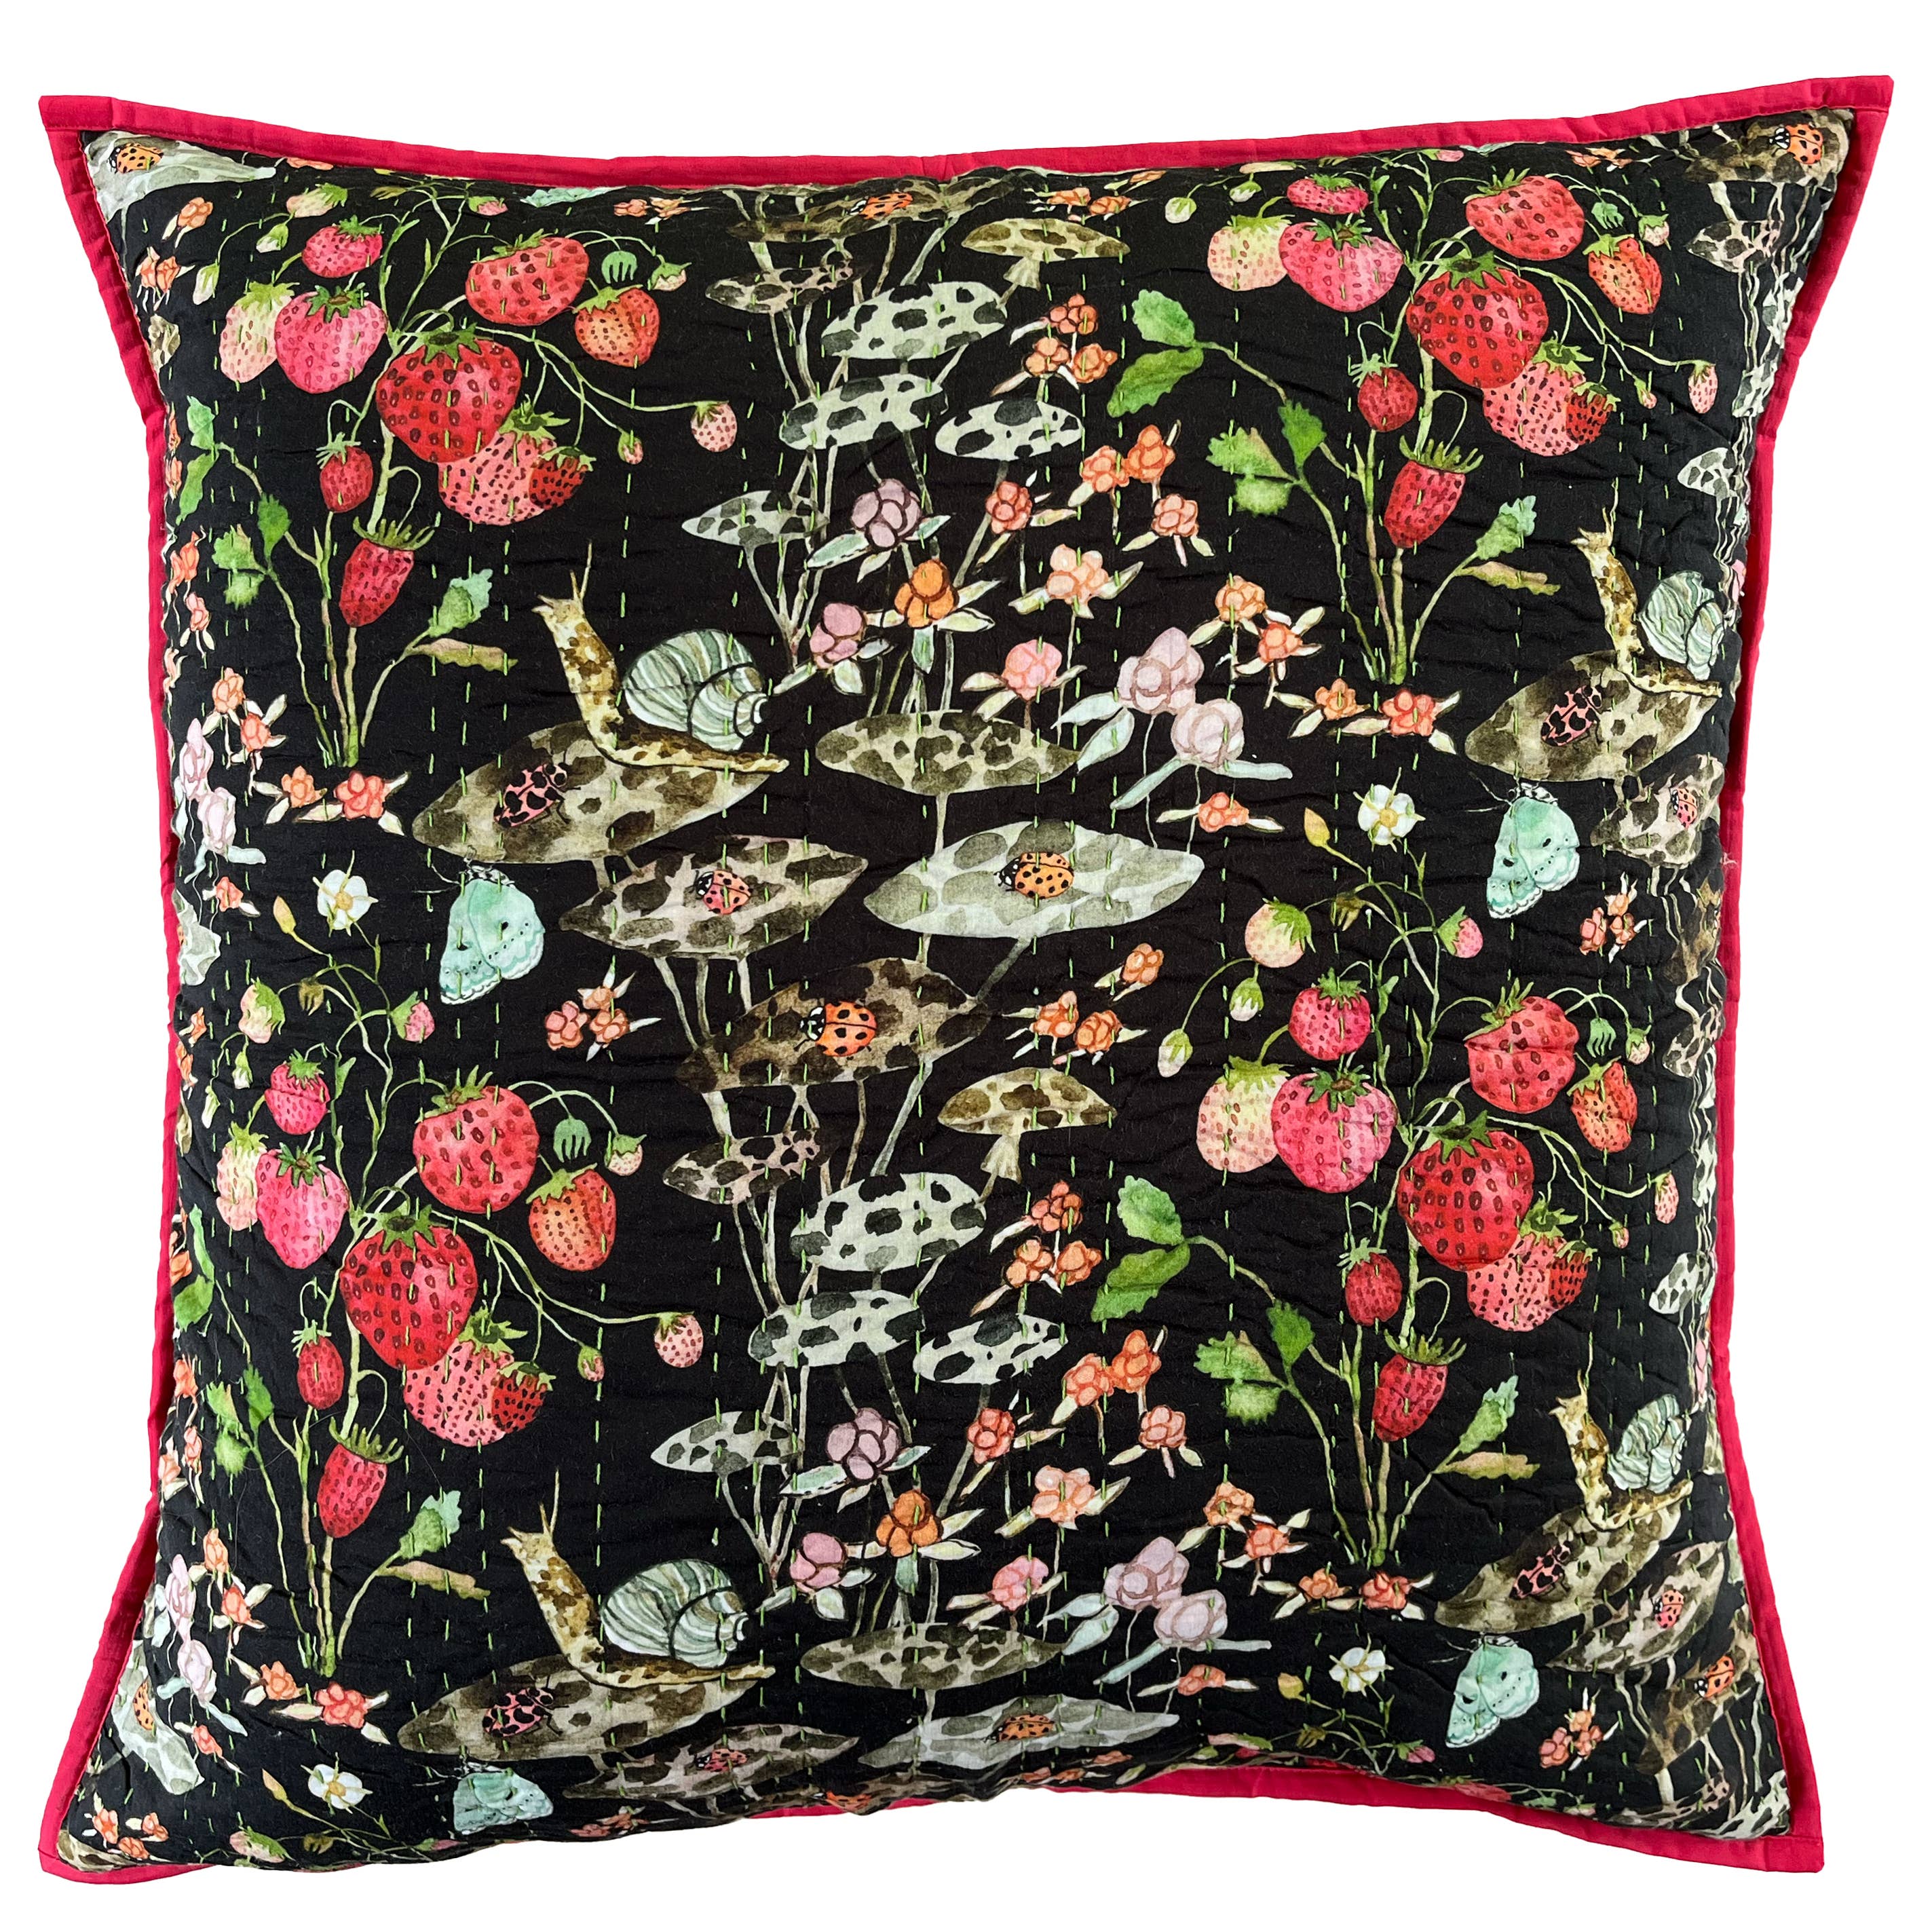 quilted pillow with strawberries